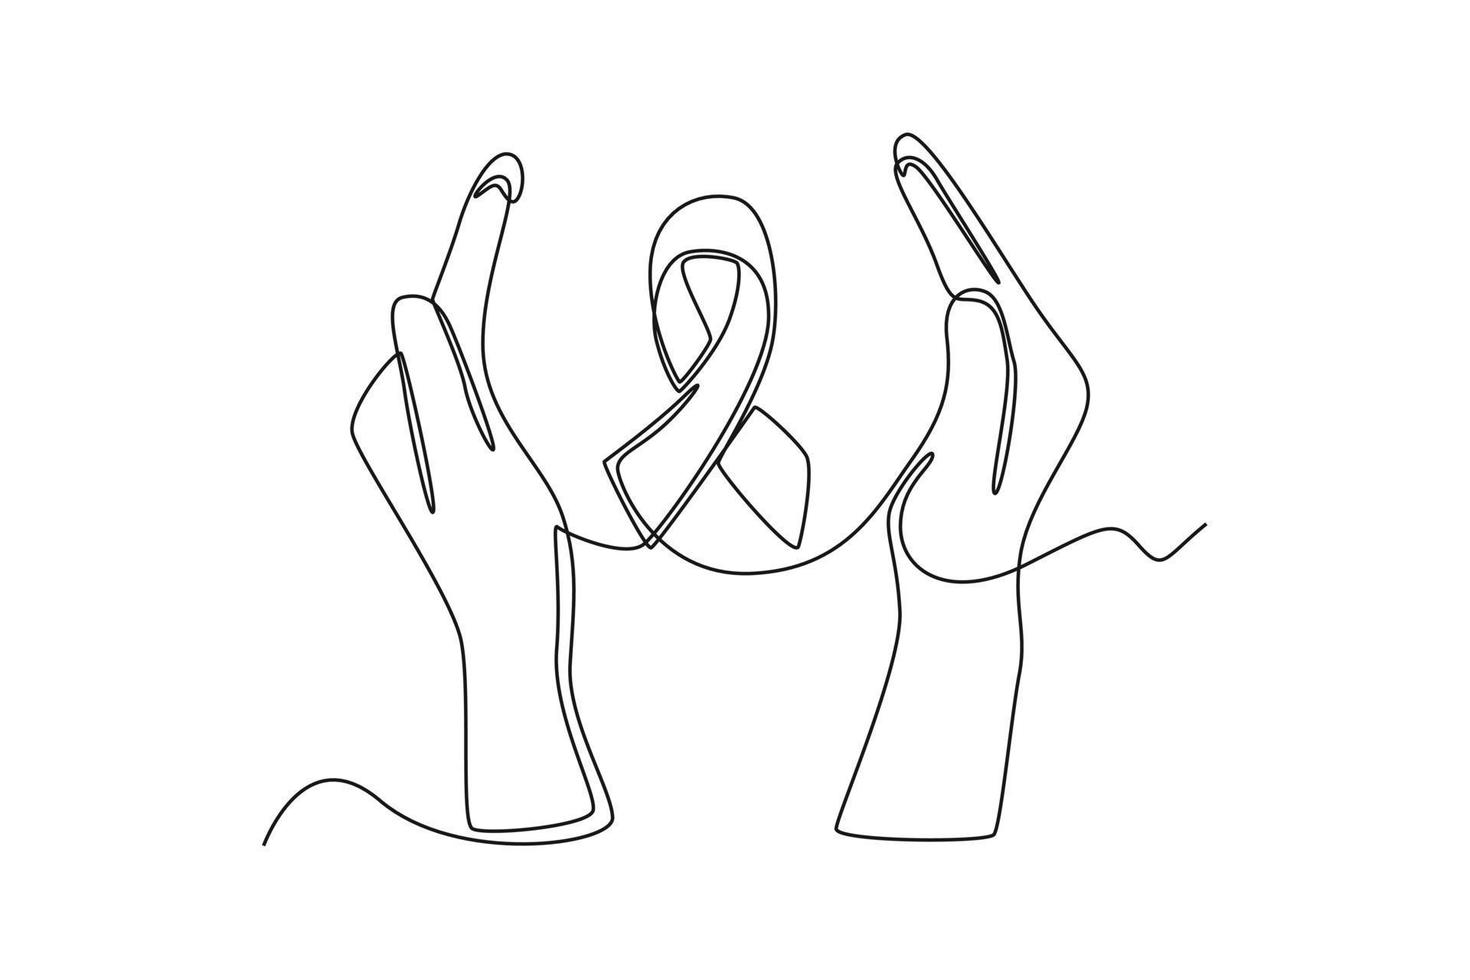 Single one line drawing hand protect ribbon. World health day concept. Continuous line draw design graphic vector illustration.